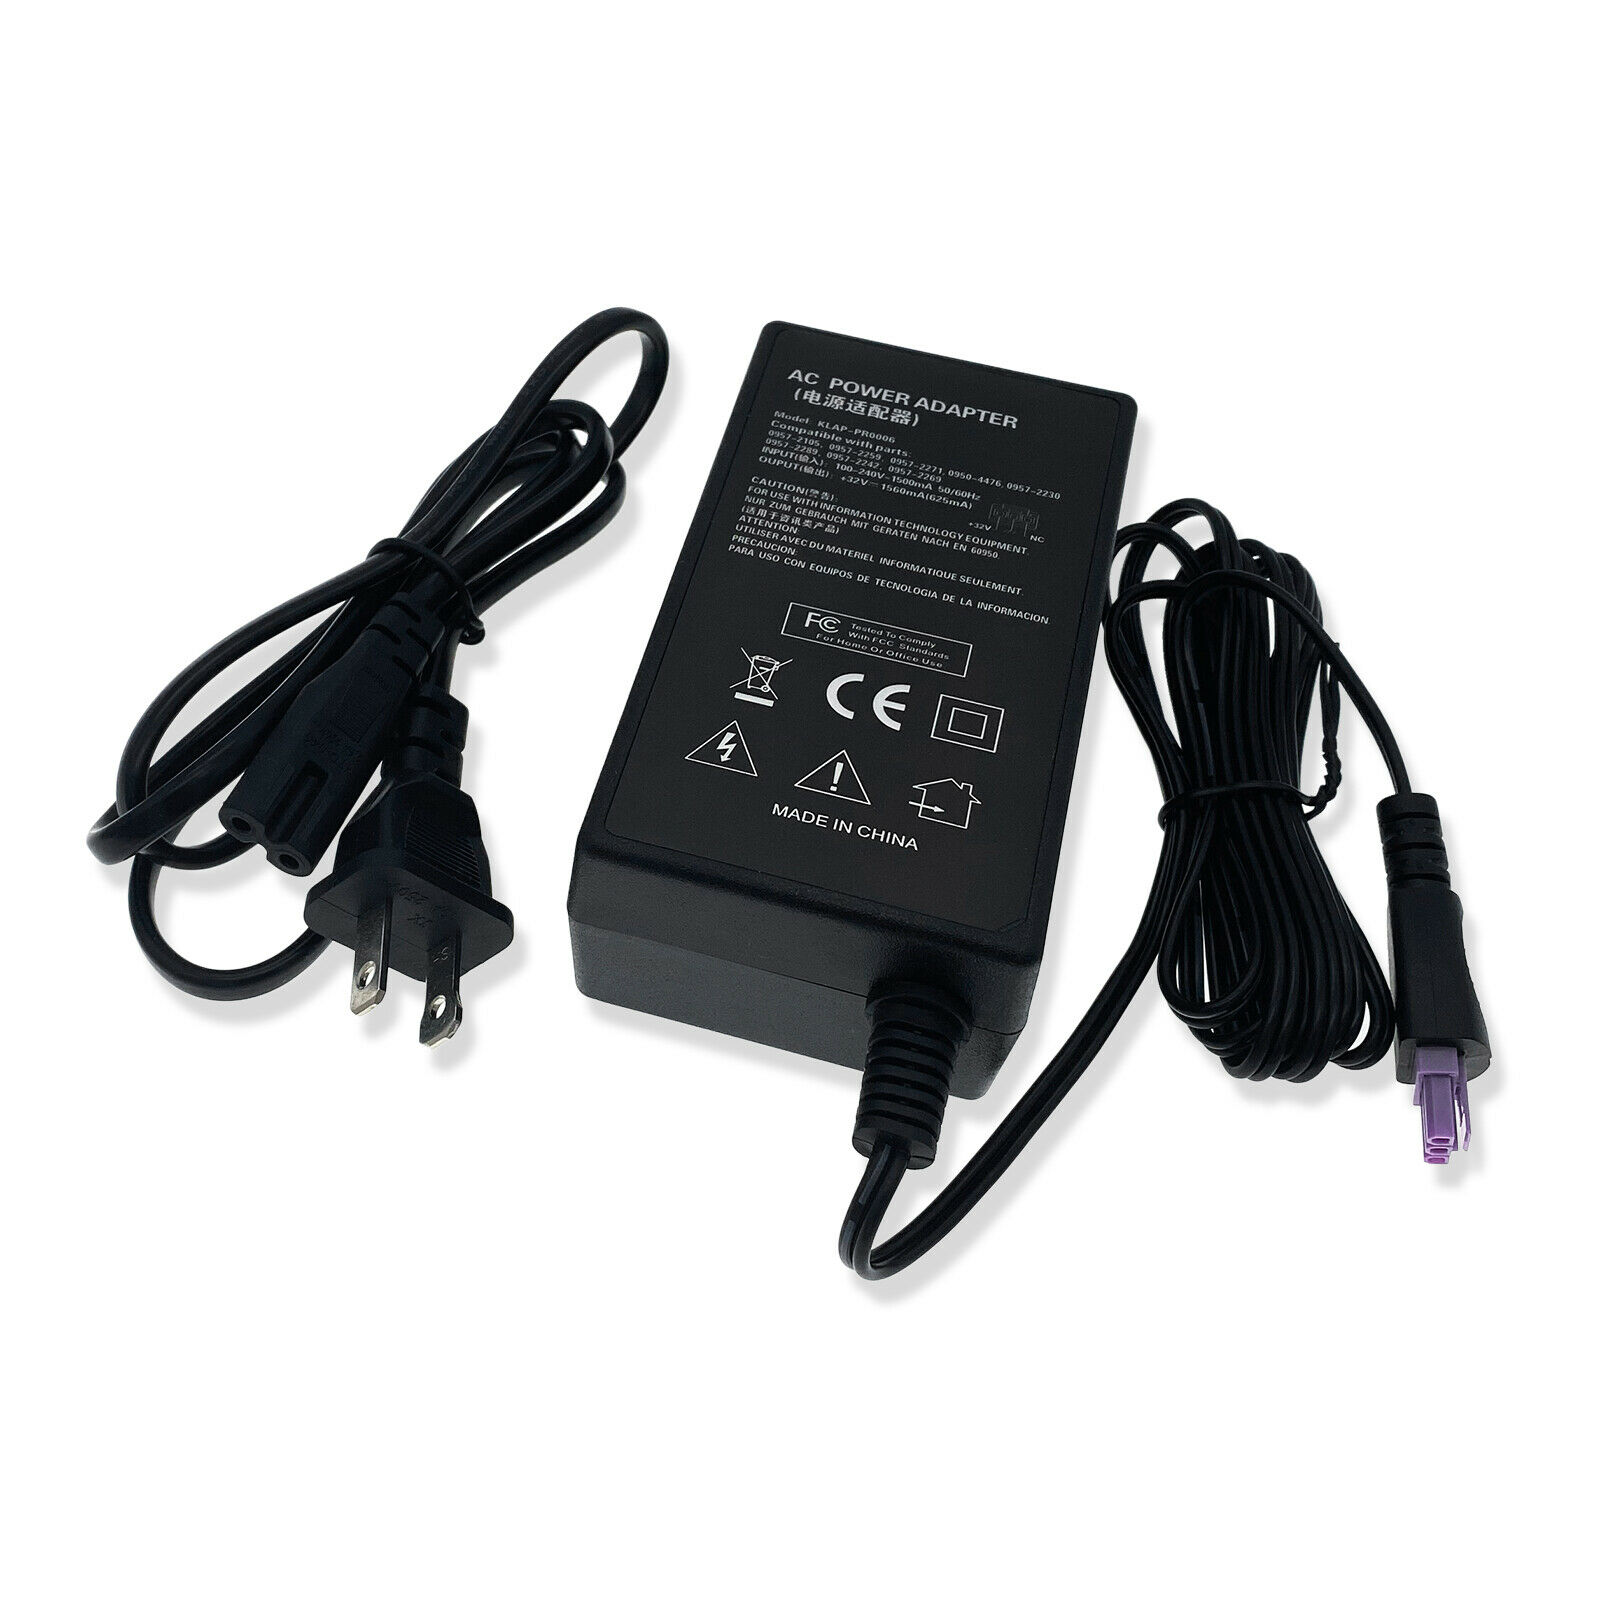 AC Adapter Charger For HP Photosmart Premium Fax C309 C309A Printer Power Supply Brand: Unbranded/Generic Compatible B